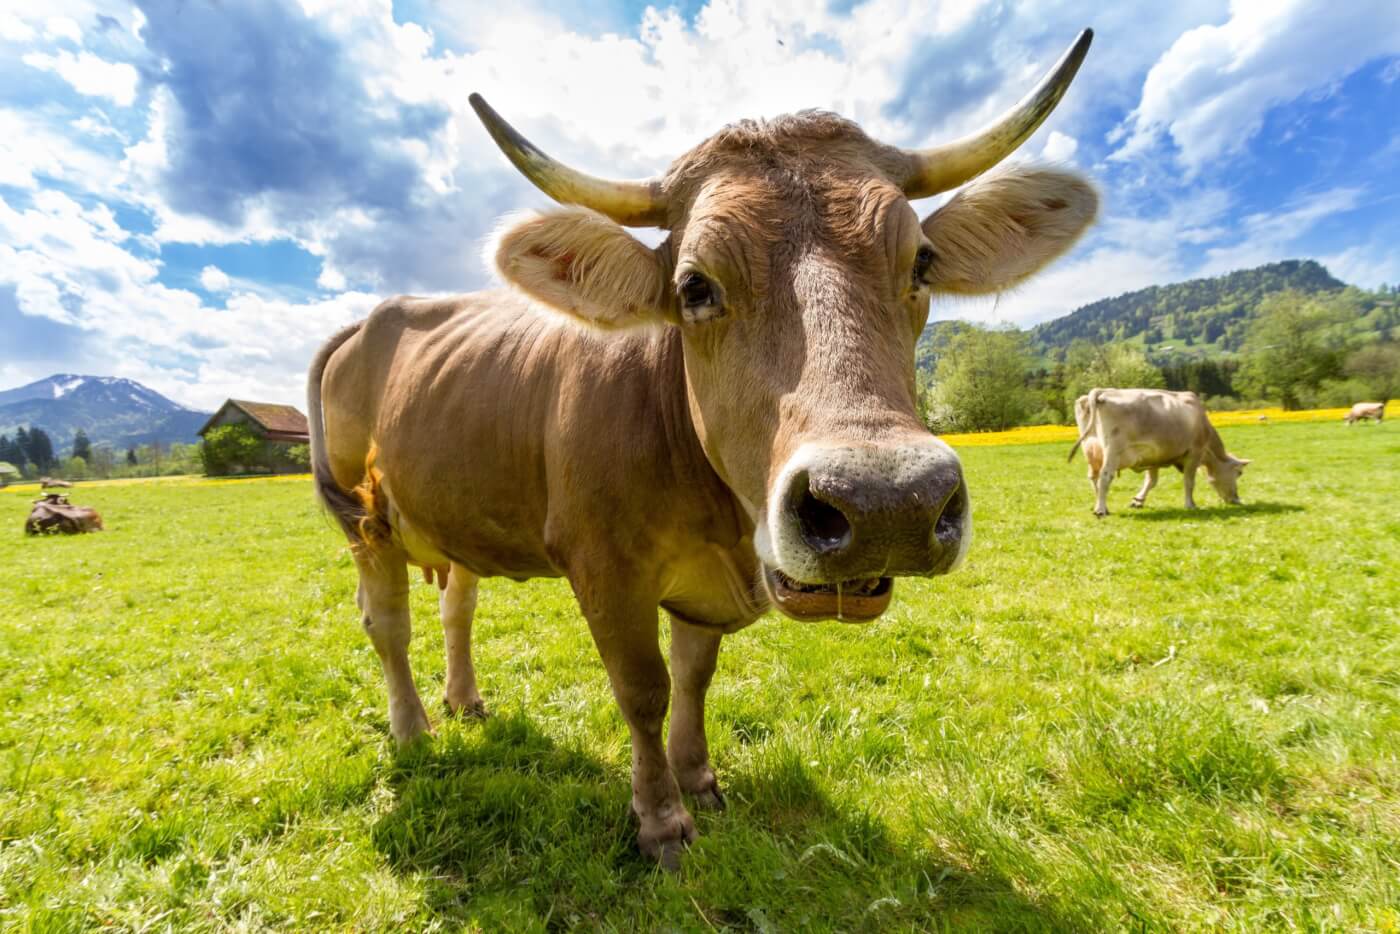 happy brown cow in open green field under blue sky with scattered white clouds